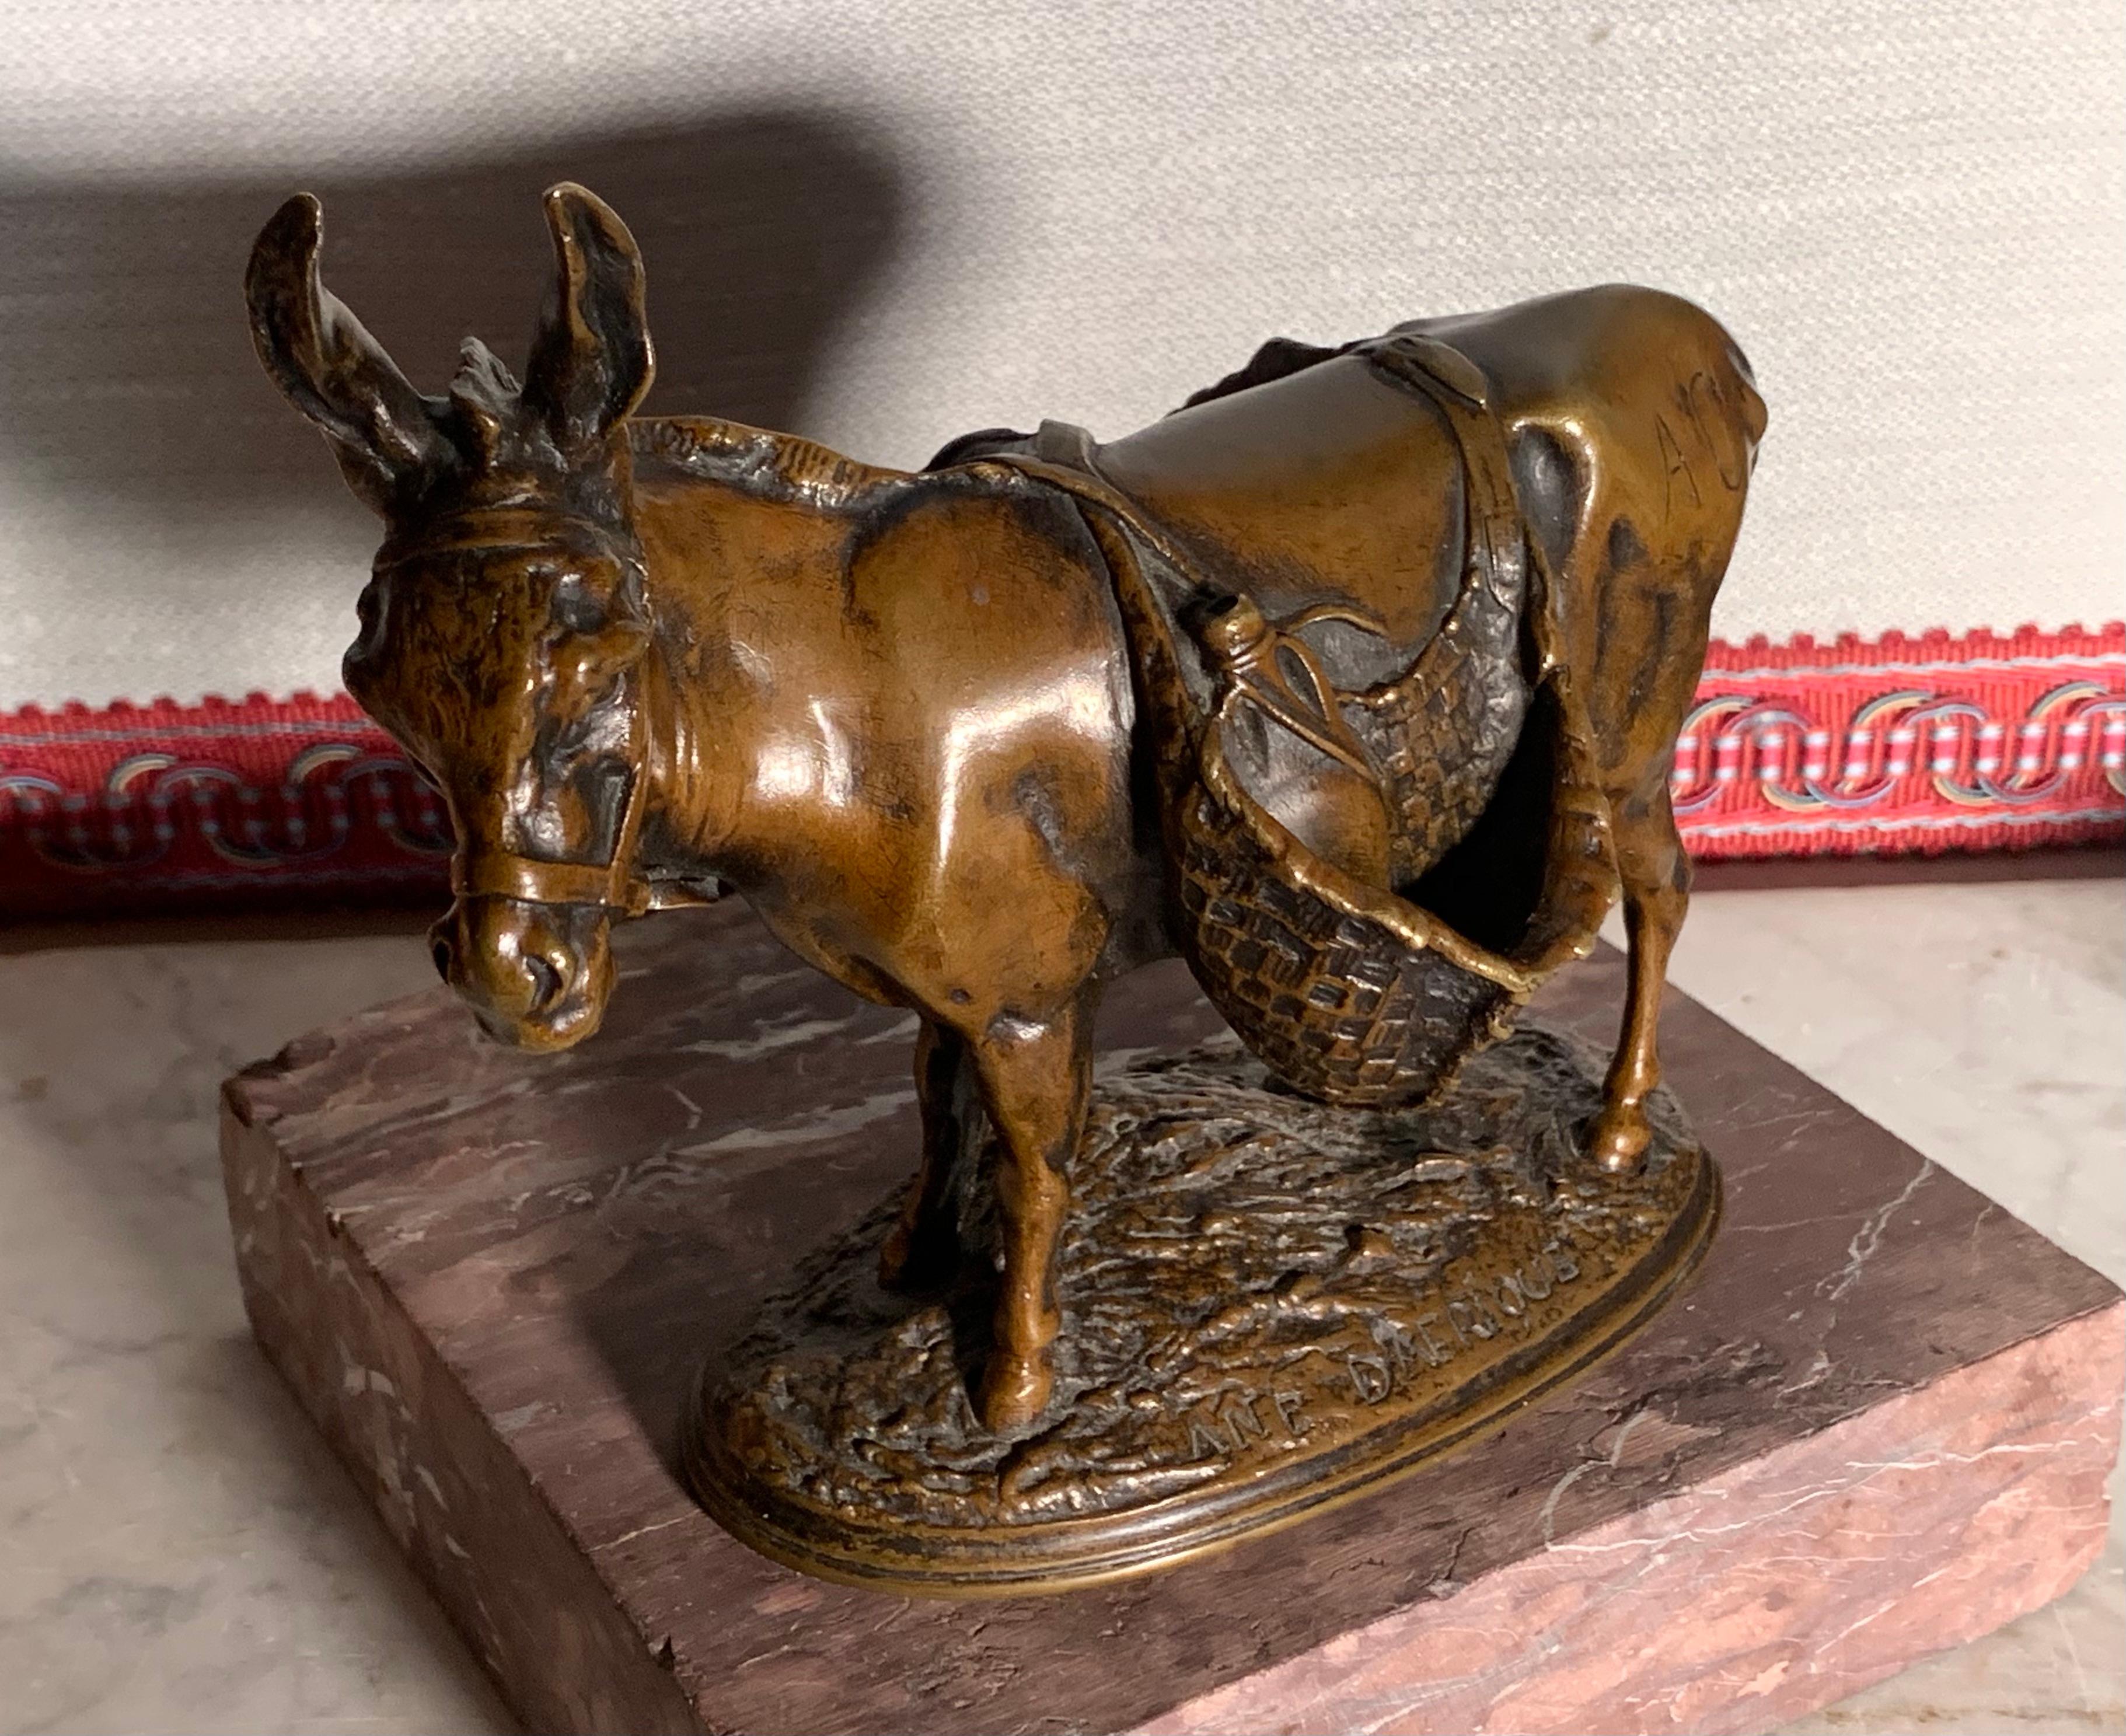 Charming little bronze by the great animal sculptor Auguste-Nicolas Cain, signed A.Cain on the side, inscribed Ane d’Afrique (Donkey from Africa)  and Susse Fres  on the terrace. The donkey is represented loaded with its woven baskets in a vivid